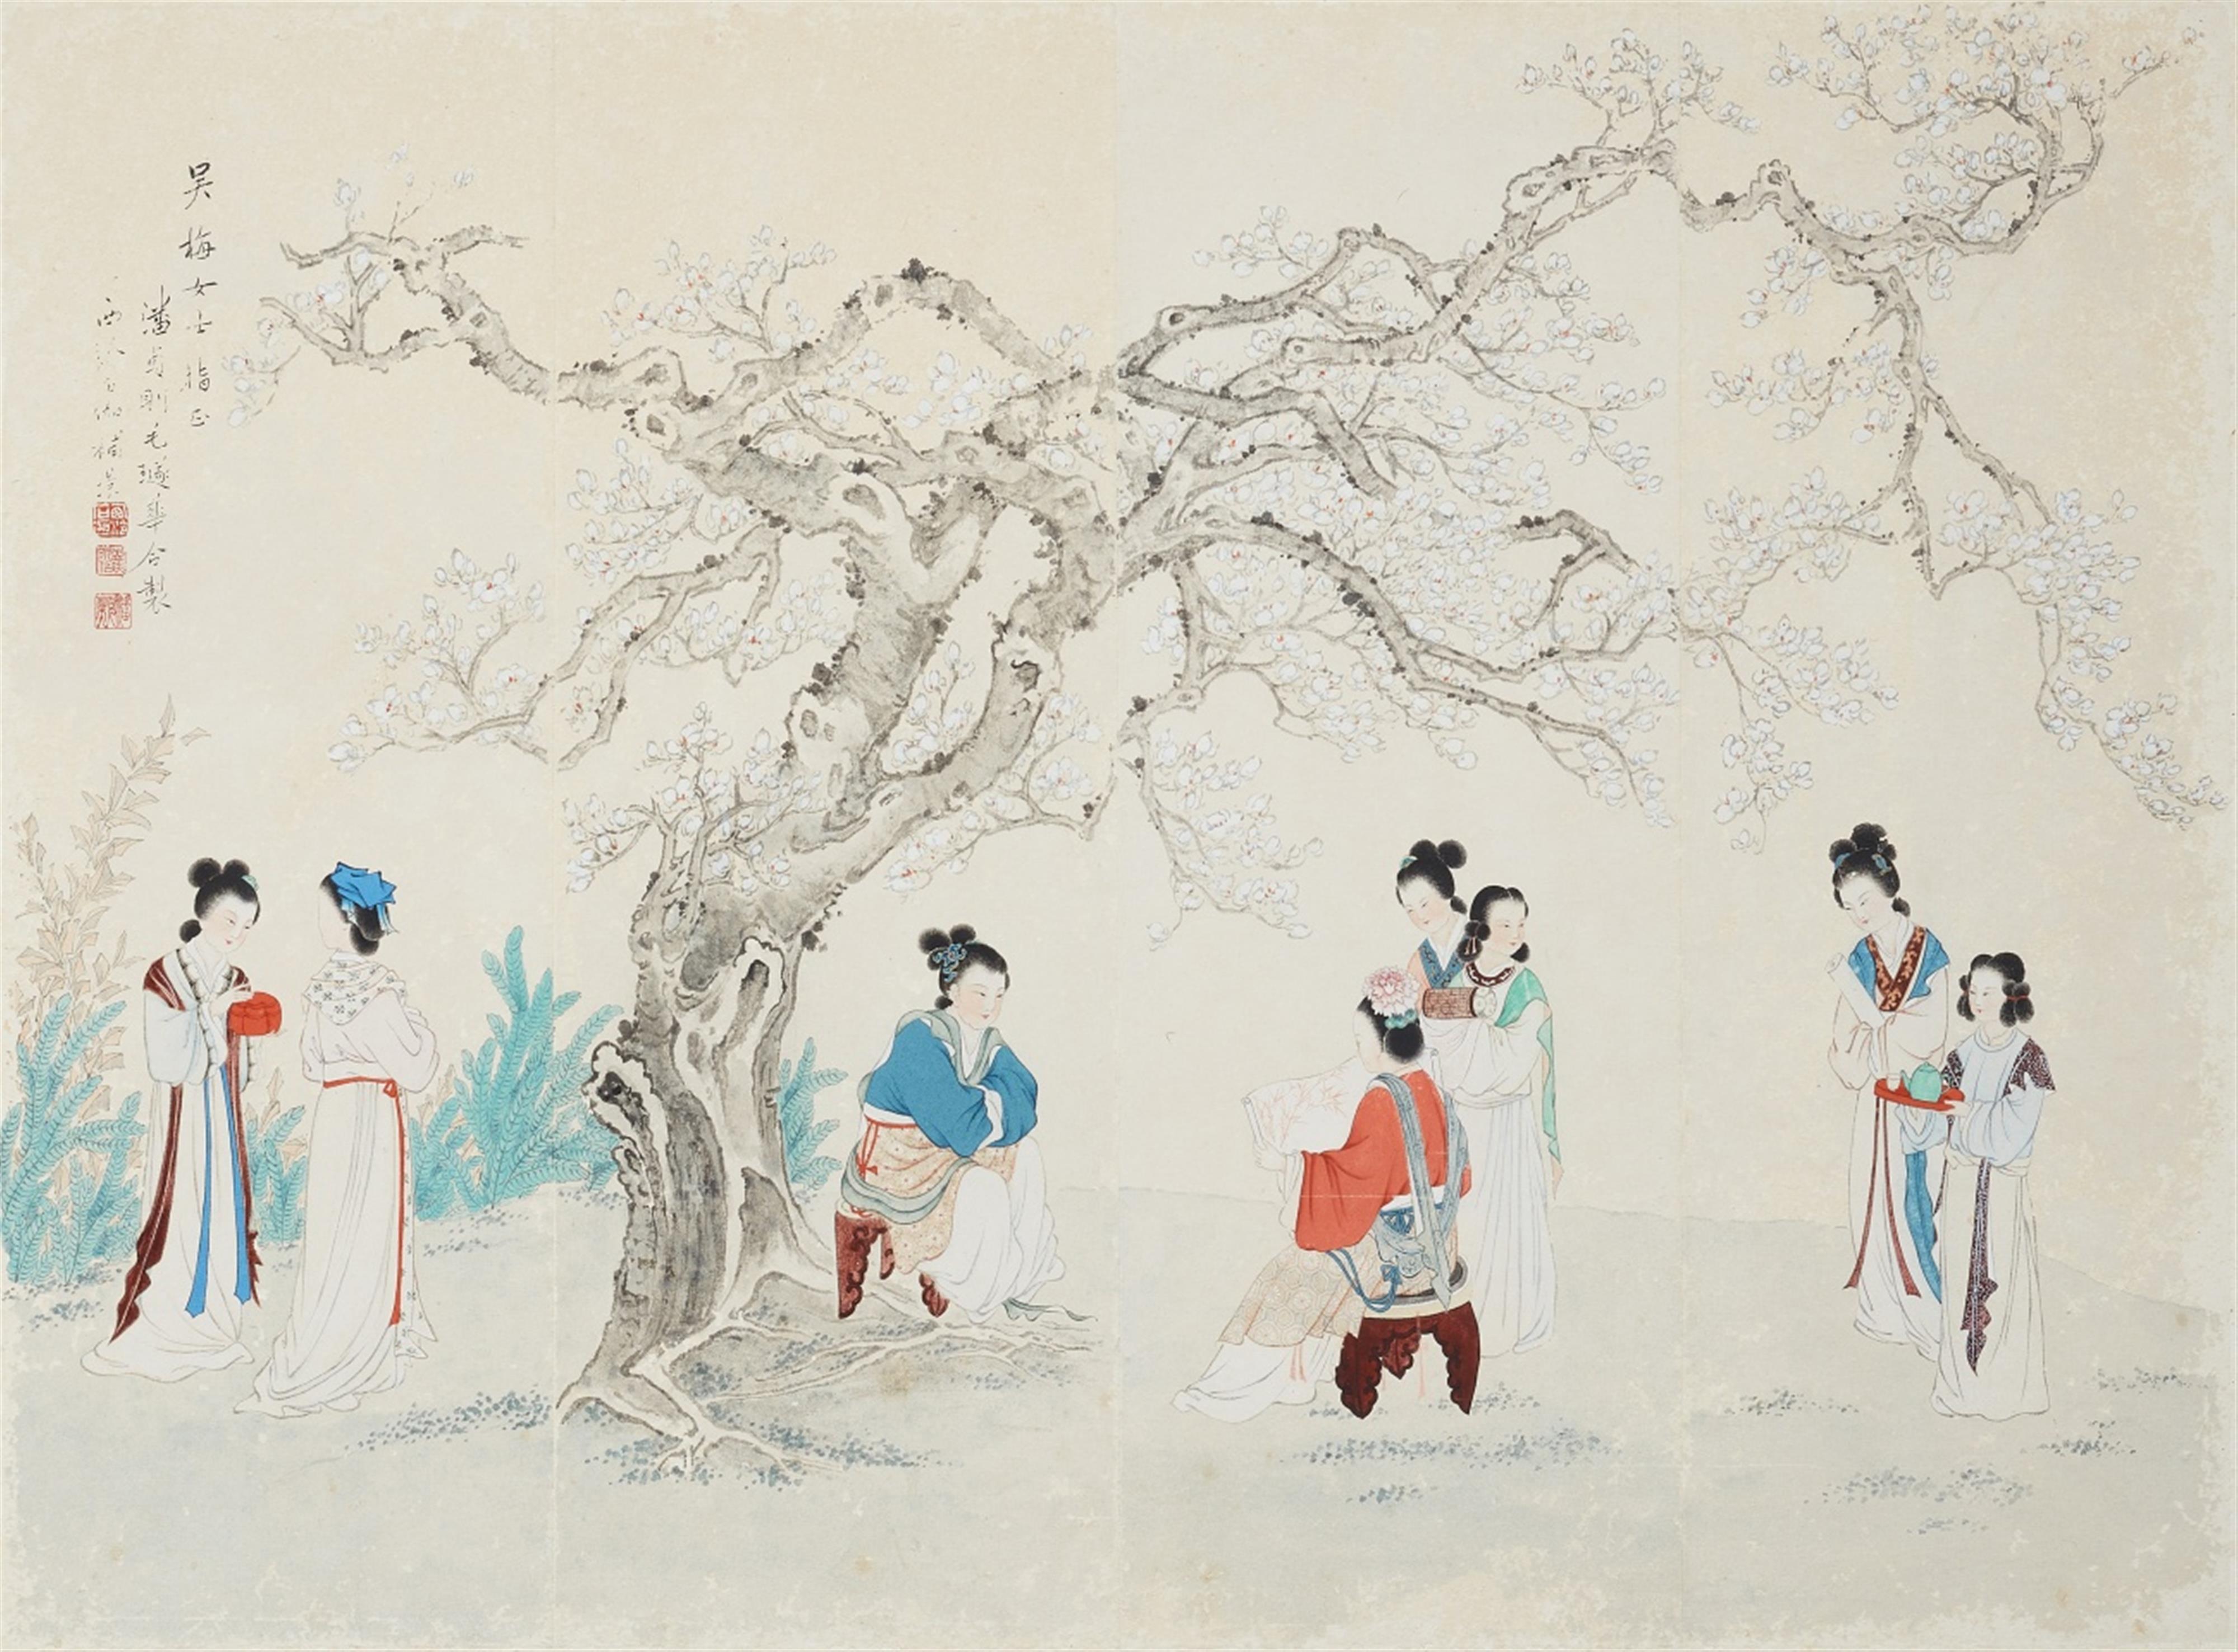 Mao Suihua und Pan Zhenze (1913-nach 1979)
Shen Shijia - Beautiful ladies at leisure below a flowering plum tree. Ink and colour on paper. Inscription, signed Xiling Shijia bujing, sealed Xiling Shijia, Meng Yan ... zuo and Pan Zhenze... - image-1